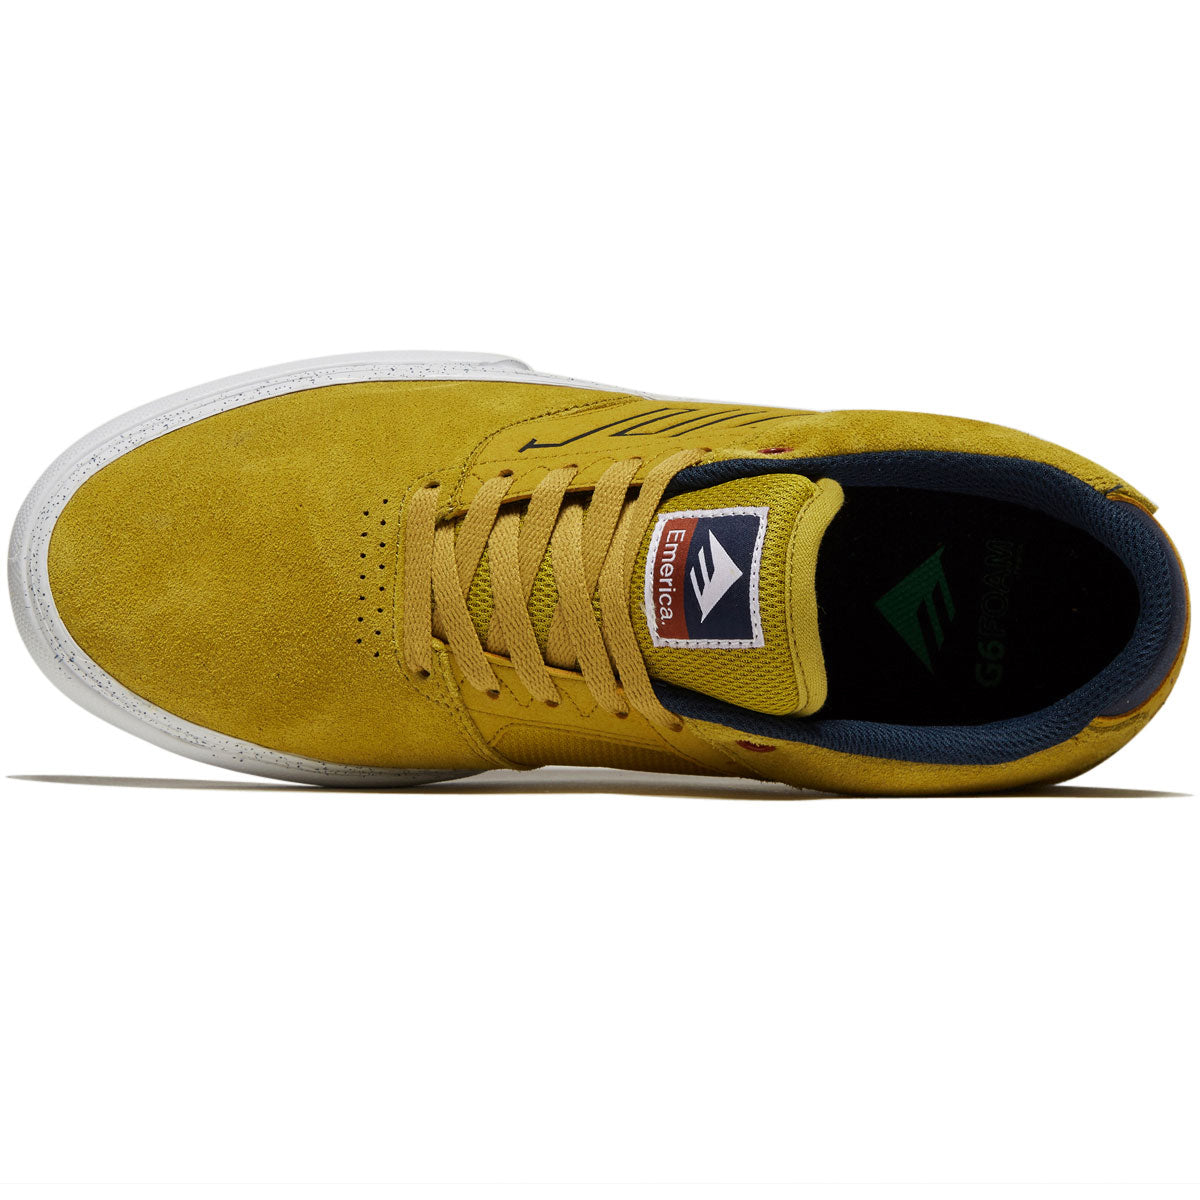 Emerica The Low Vulc Shoes - Gold image 3